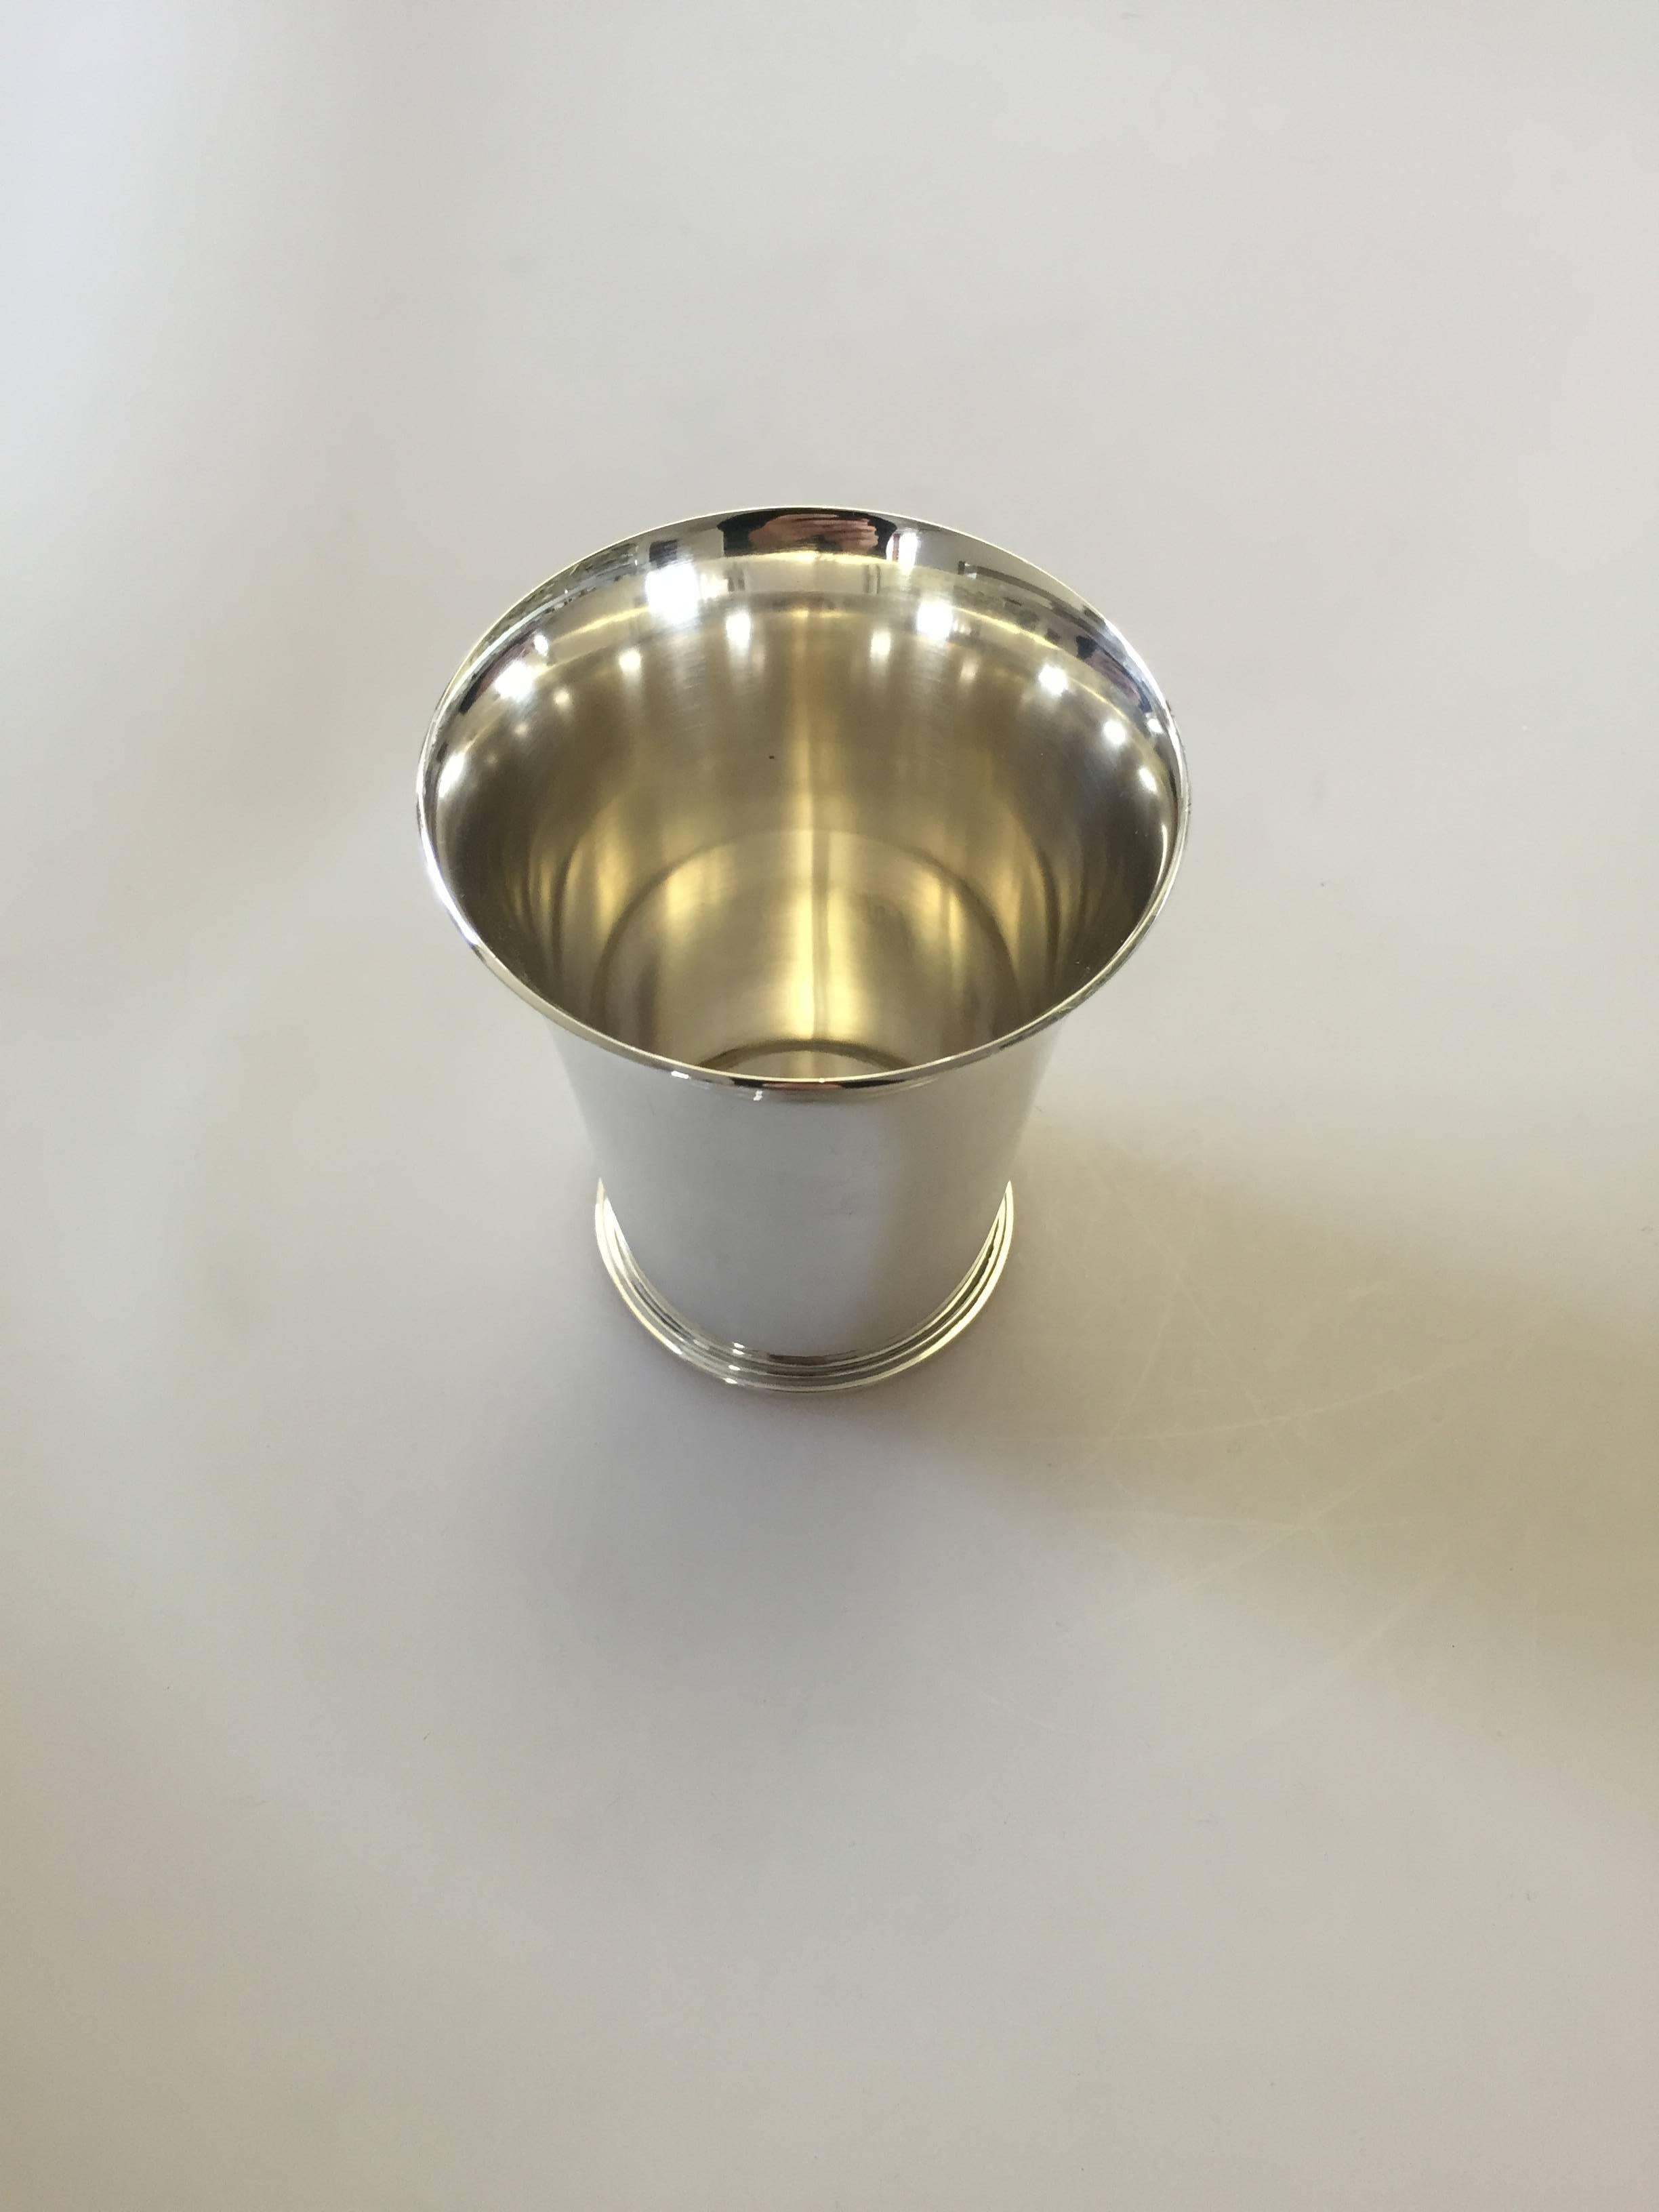 Georg Jensen sterling silver cup #671C designed by Harald Nielsen. The cup measures 9 cm x 7.5 cm and is in a good condition. 

Harald Nielsen (1892-1977) was the originator of some of the most successful designs for Georg Jensen in the 1920s and